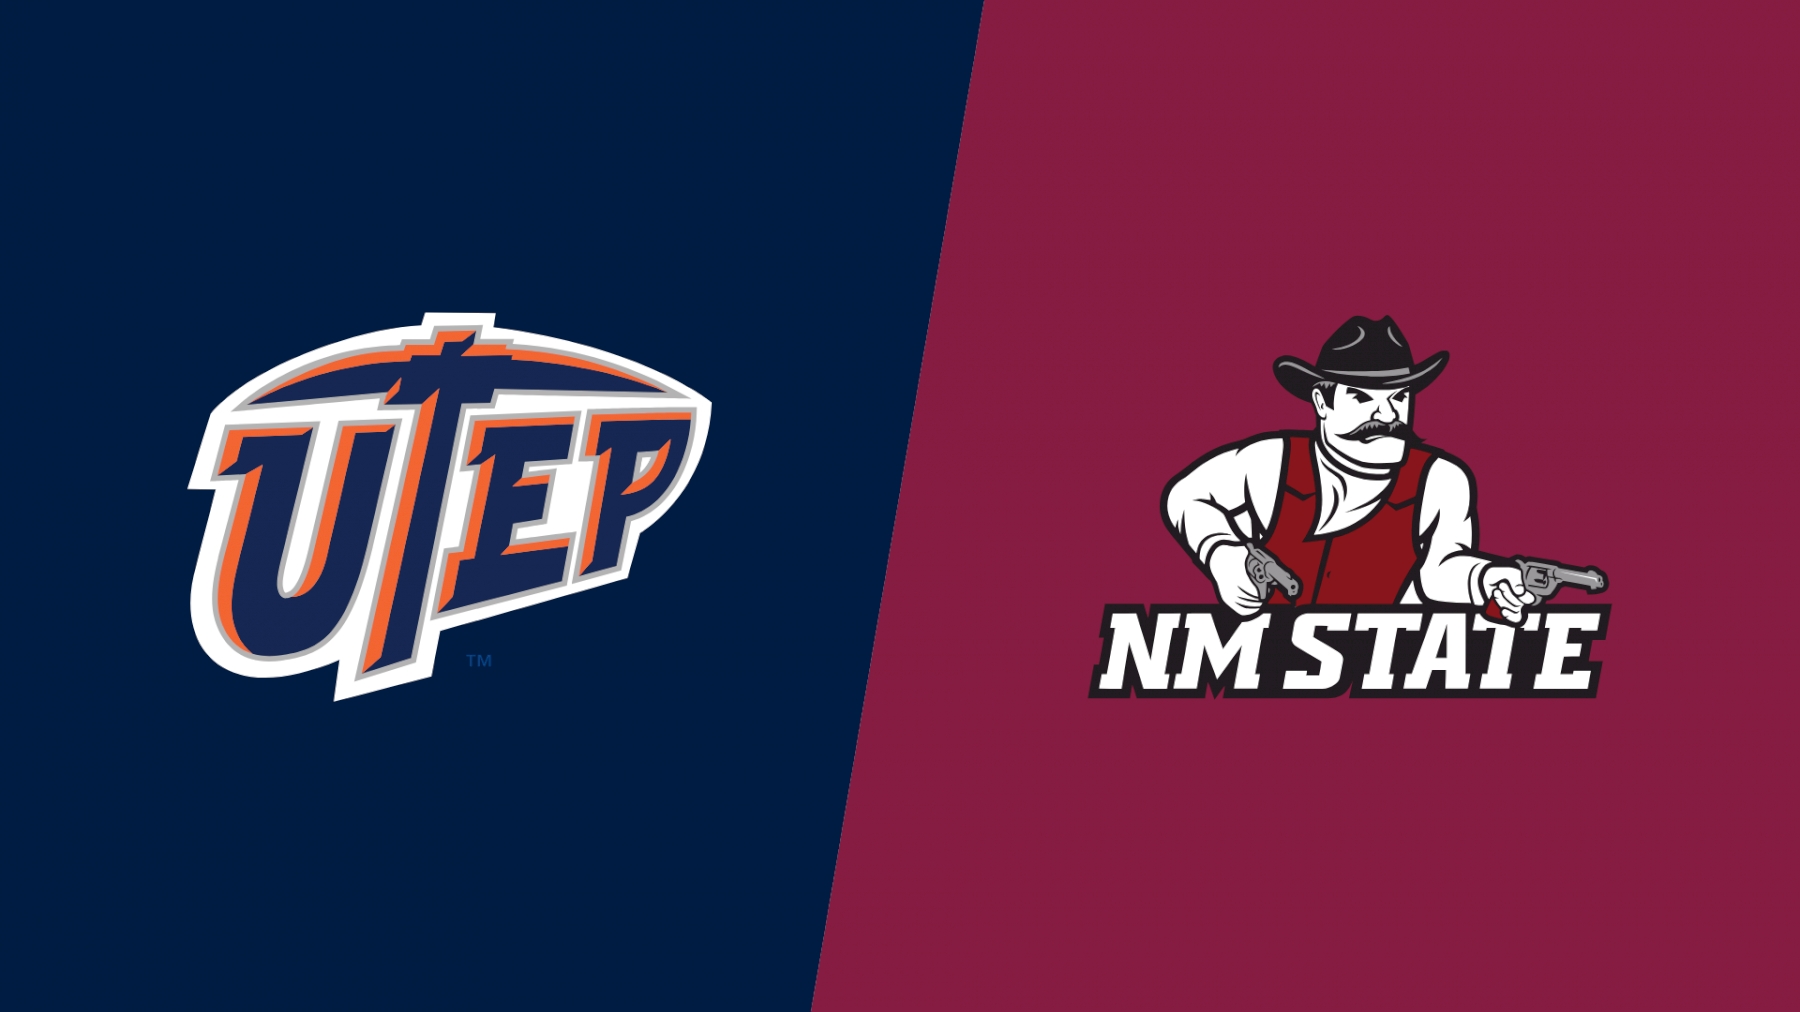 2019 UTEP vs New Mexico State | NCAA Football - Schedule - FloFootball